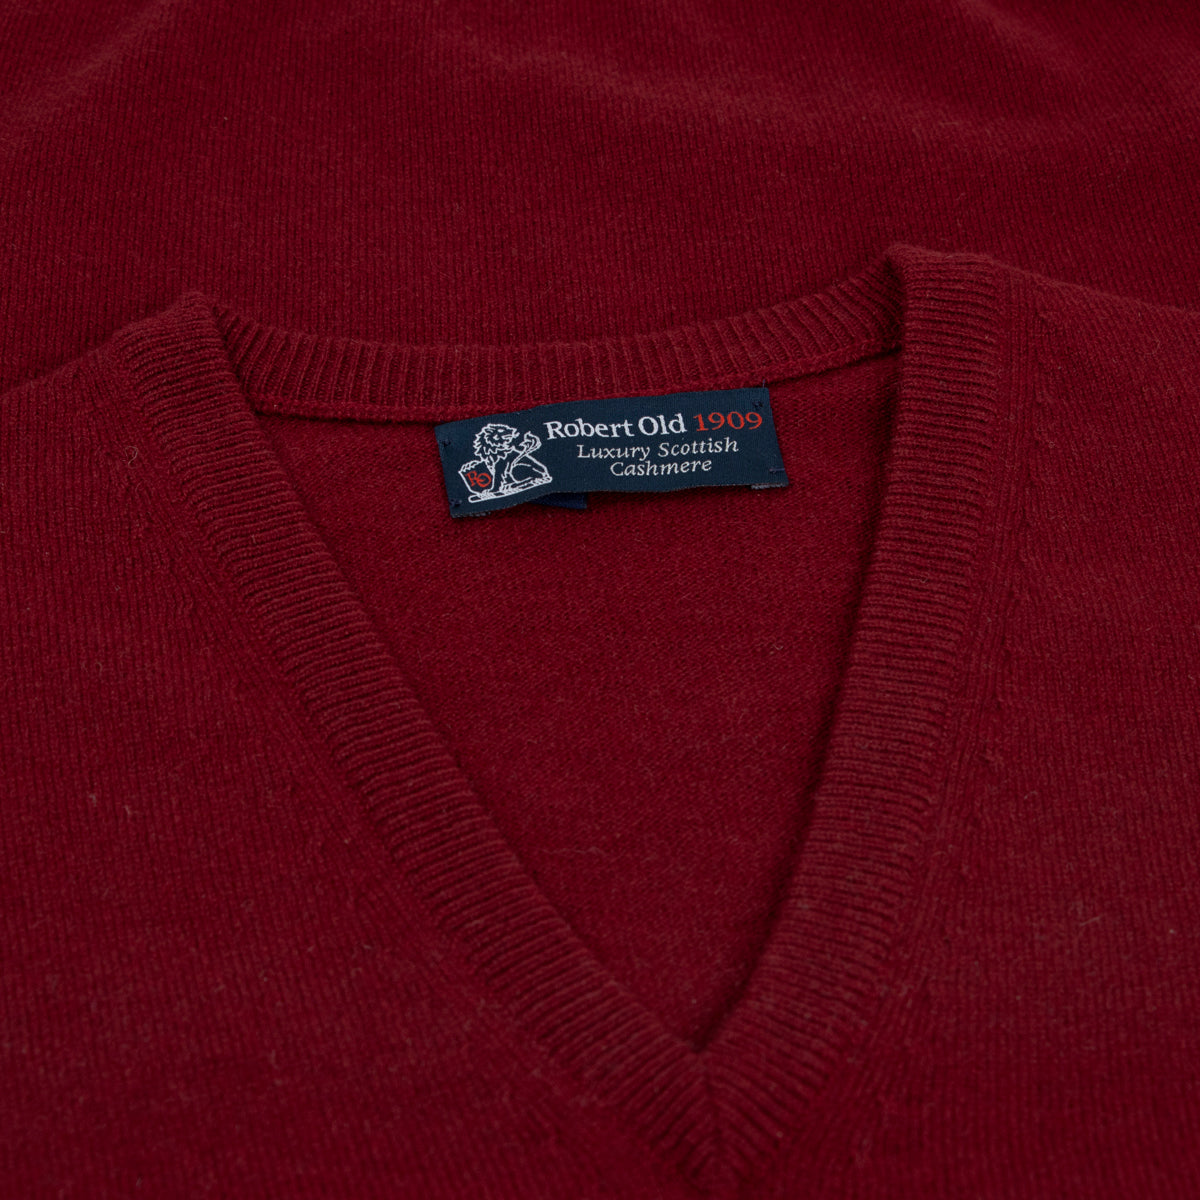 Claret Red Chatsworth 2ply V-Neck Cashmere Sweater  Robert Old   